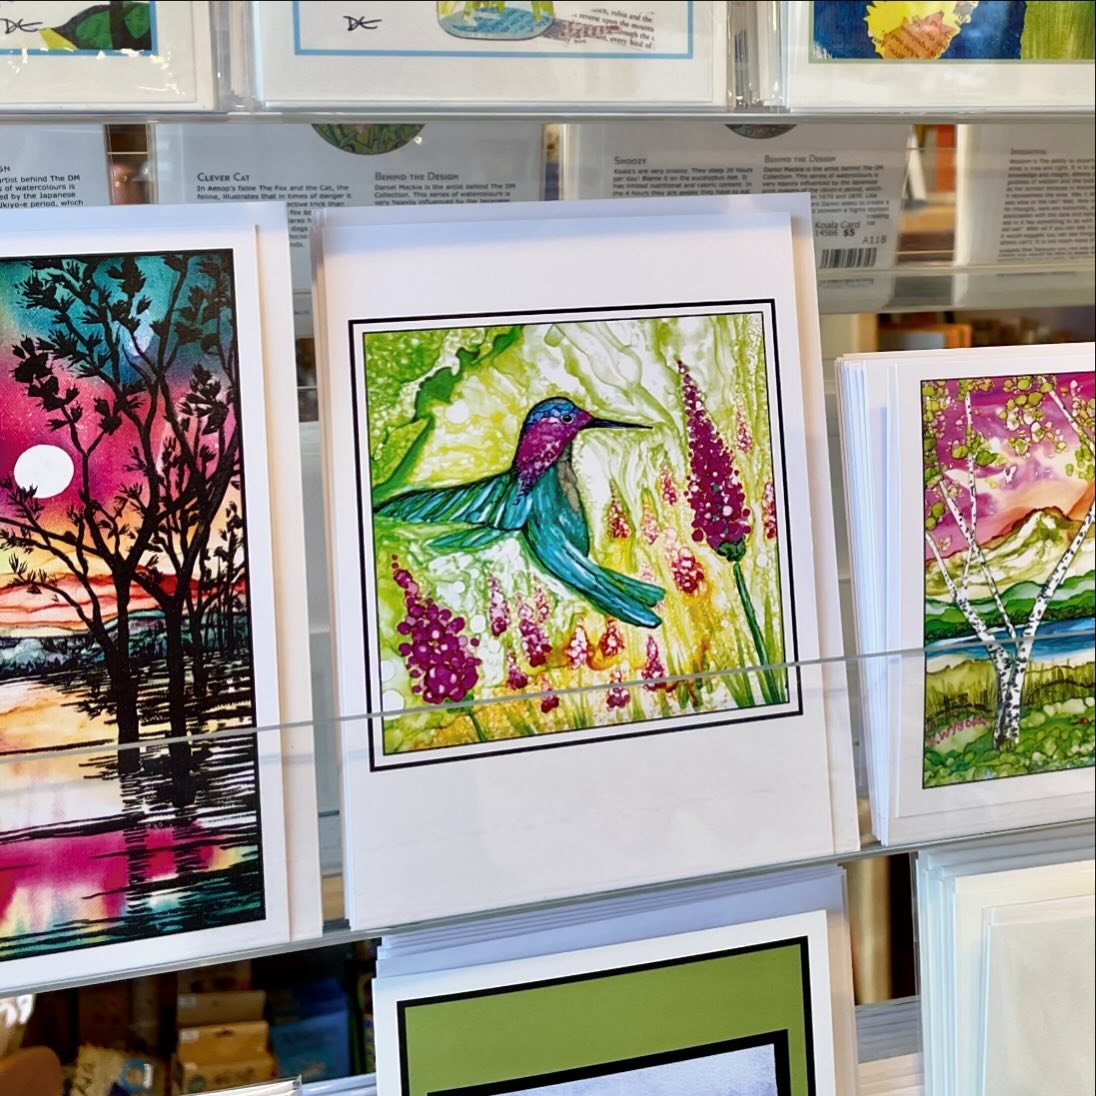 Restock alert!  This is the last restock of cards from Northwest artist Karen Wysopal&rsquo;s amazing alcohol ink prints. She has moved on to other pursuits so this is all there will be. At least for the foreseeable future. So if you love this art, c